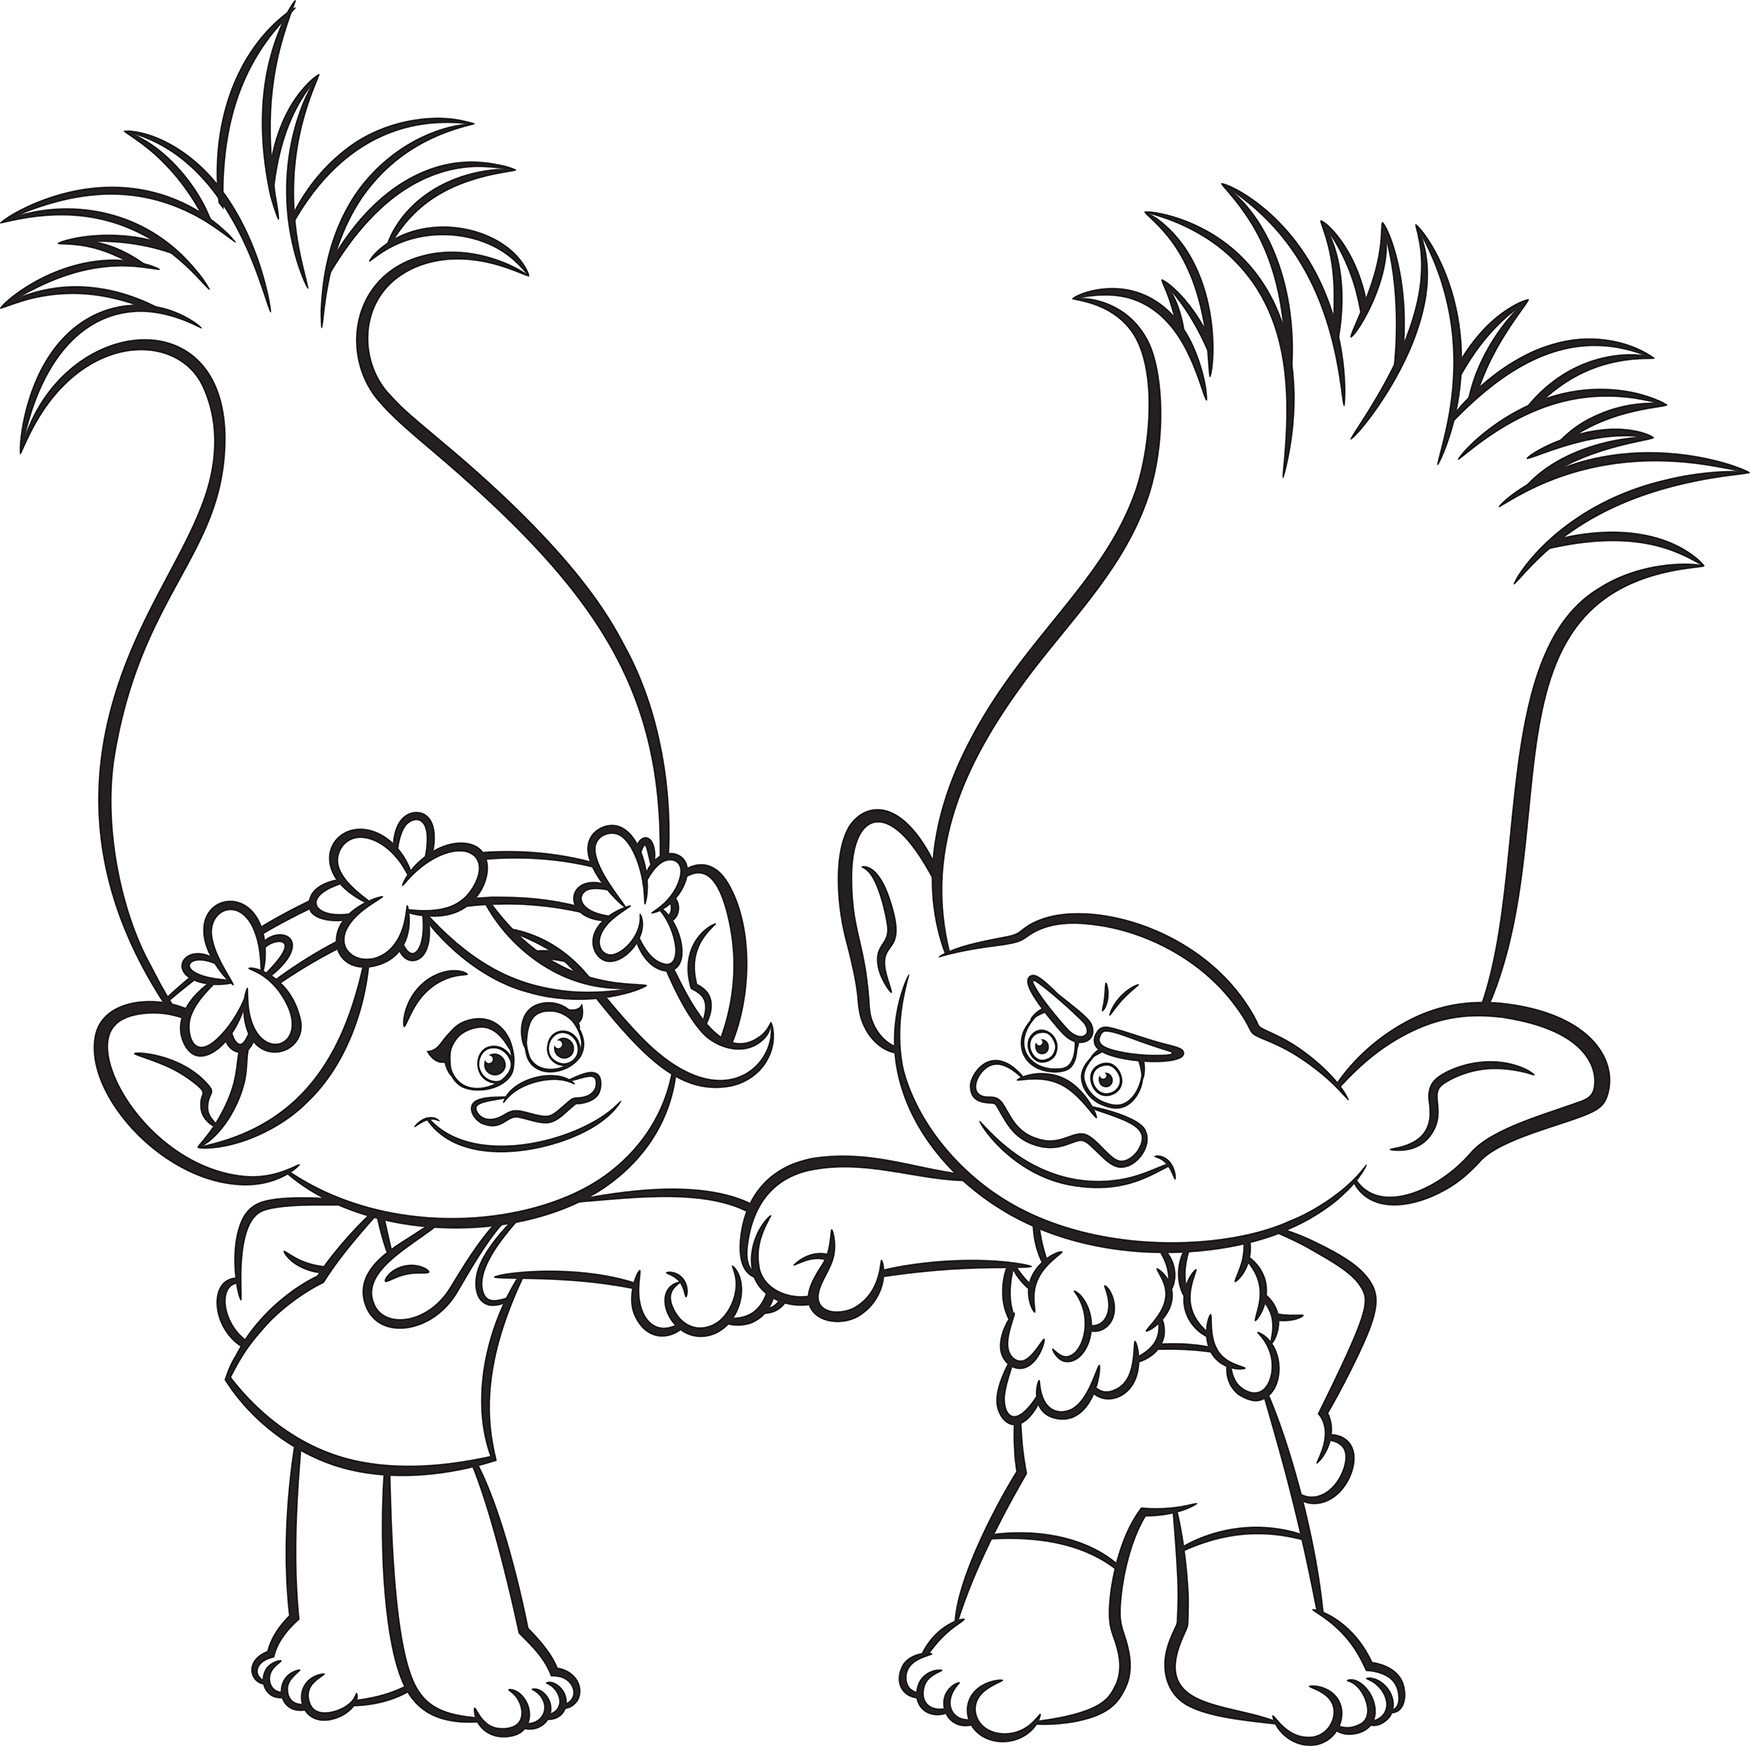 Poppy Coloring Pages - Best Coloring Pages For Kids